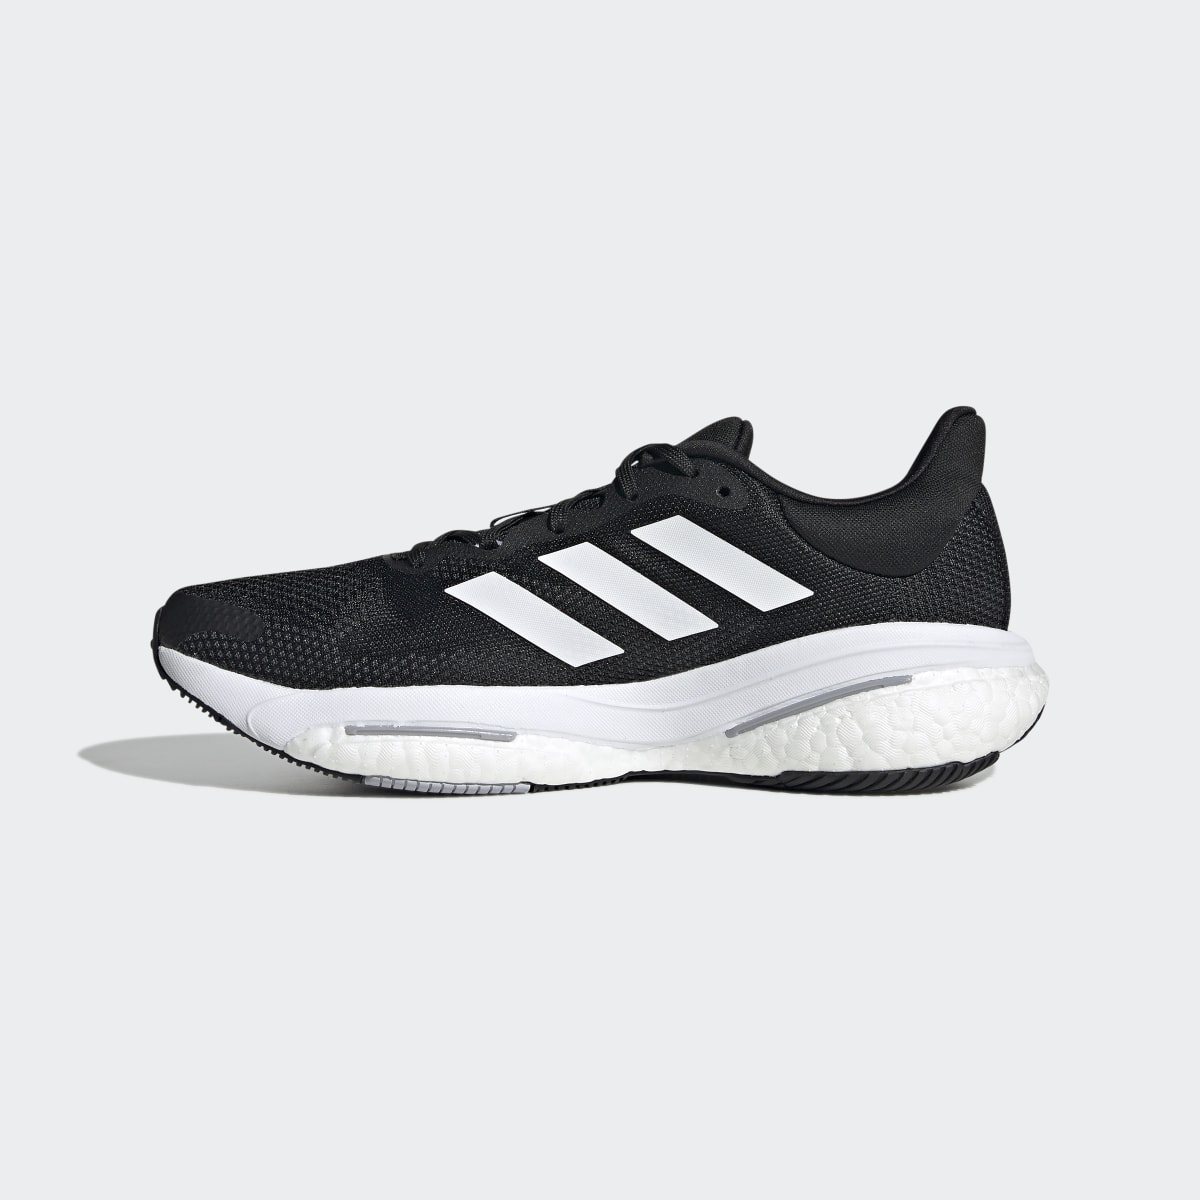 Adidas Solar Glide 5 Shoes Wide. 10